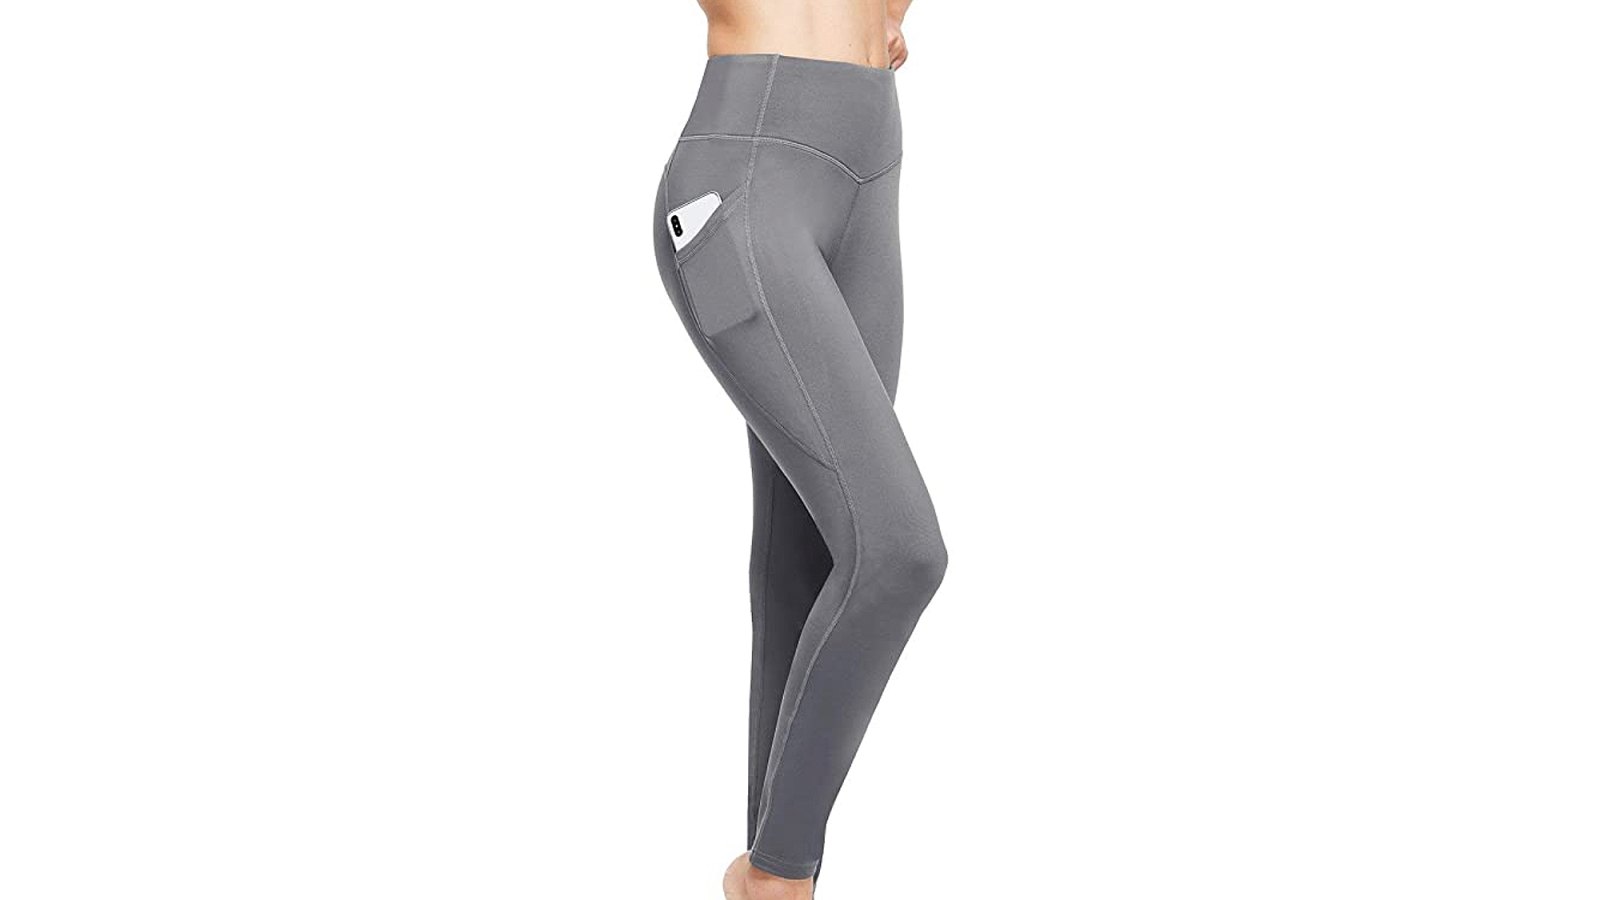 The best thermal leggings for outdoor workouts in winter – Baleaf